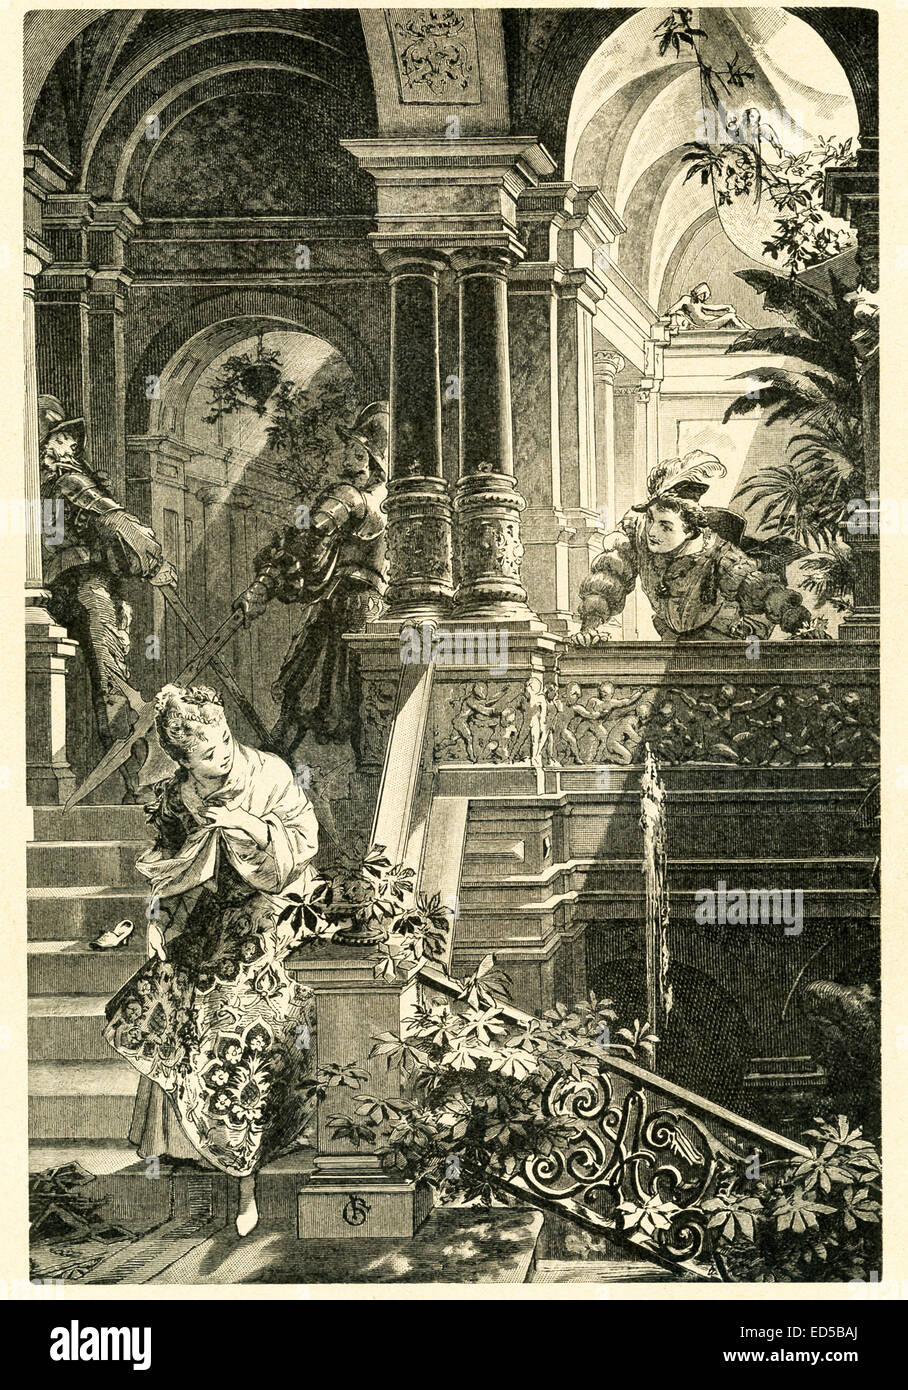 In 1812, the Grimm brothers, Jacob and Wilhelm, published Children and Household Tales, a collection German fairy tales. This illustration accompanied the tale 'Cinderella' and shows Cinderella leaving the ball and the prince in a rush to get home before midnight. Look closely and you can see the shoe that Cinderella mistakenly leaves behind in her hurry on the stairs. This image is from Grimms Eventyr (Grimm's Fairy Tales) by Carl Ewald, published in 1922. The frontispiece has the illustrations by Philip Grot Johann and R. Leinweber. Johann was a well-known German illustrator and did pieces f Stock Photo